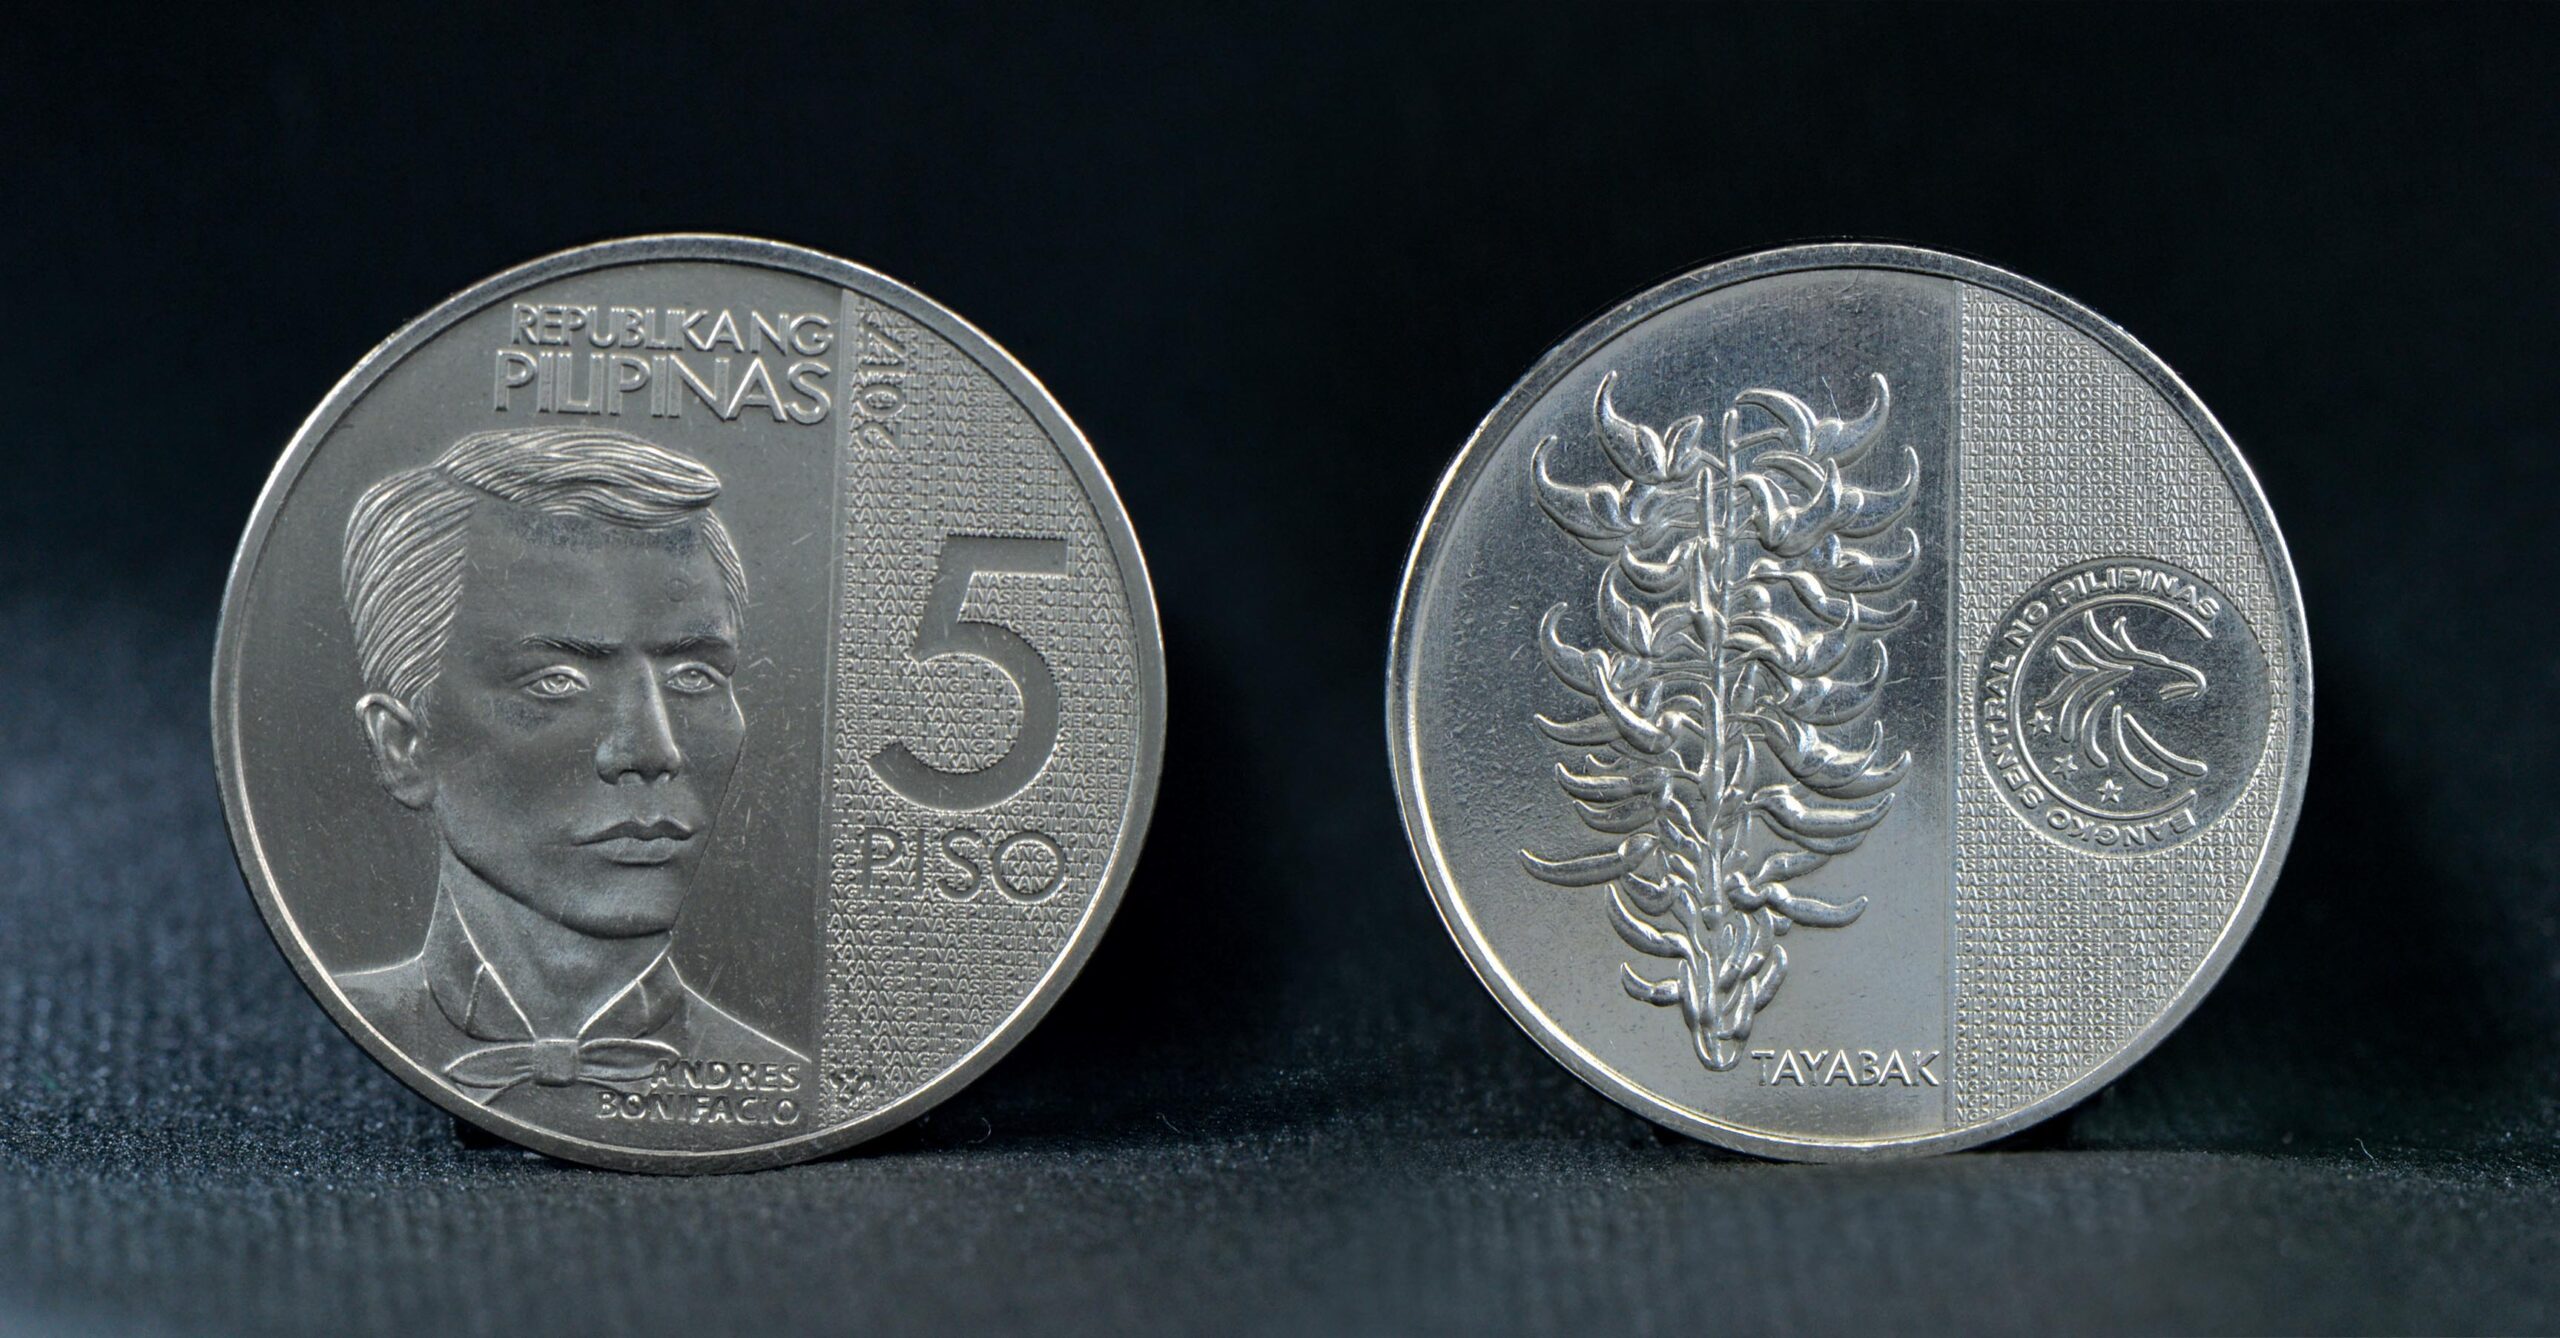 BSP releases new P5 coin to honor Andres Bonifacio